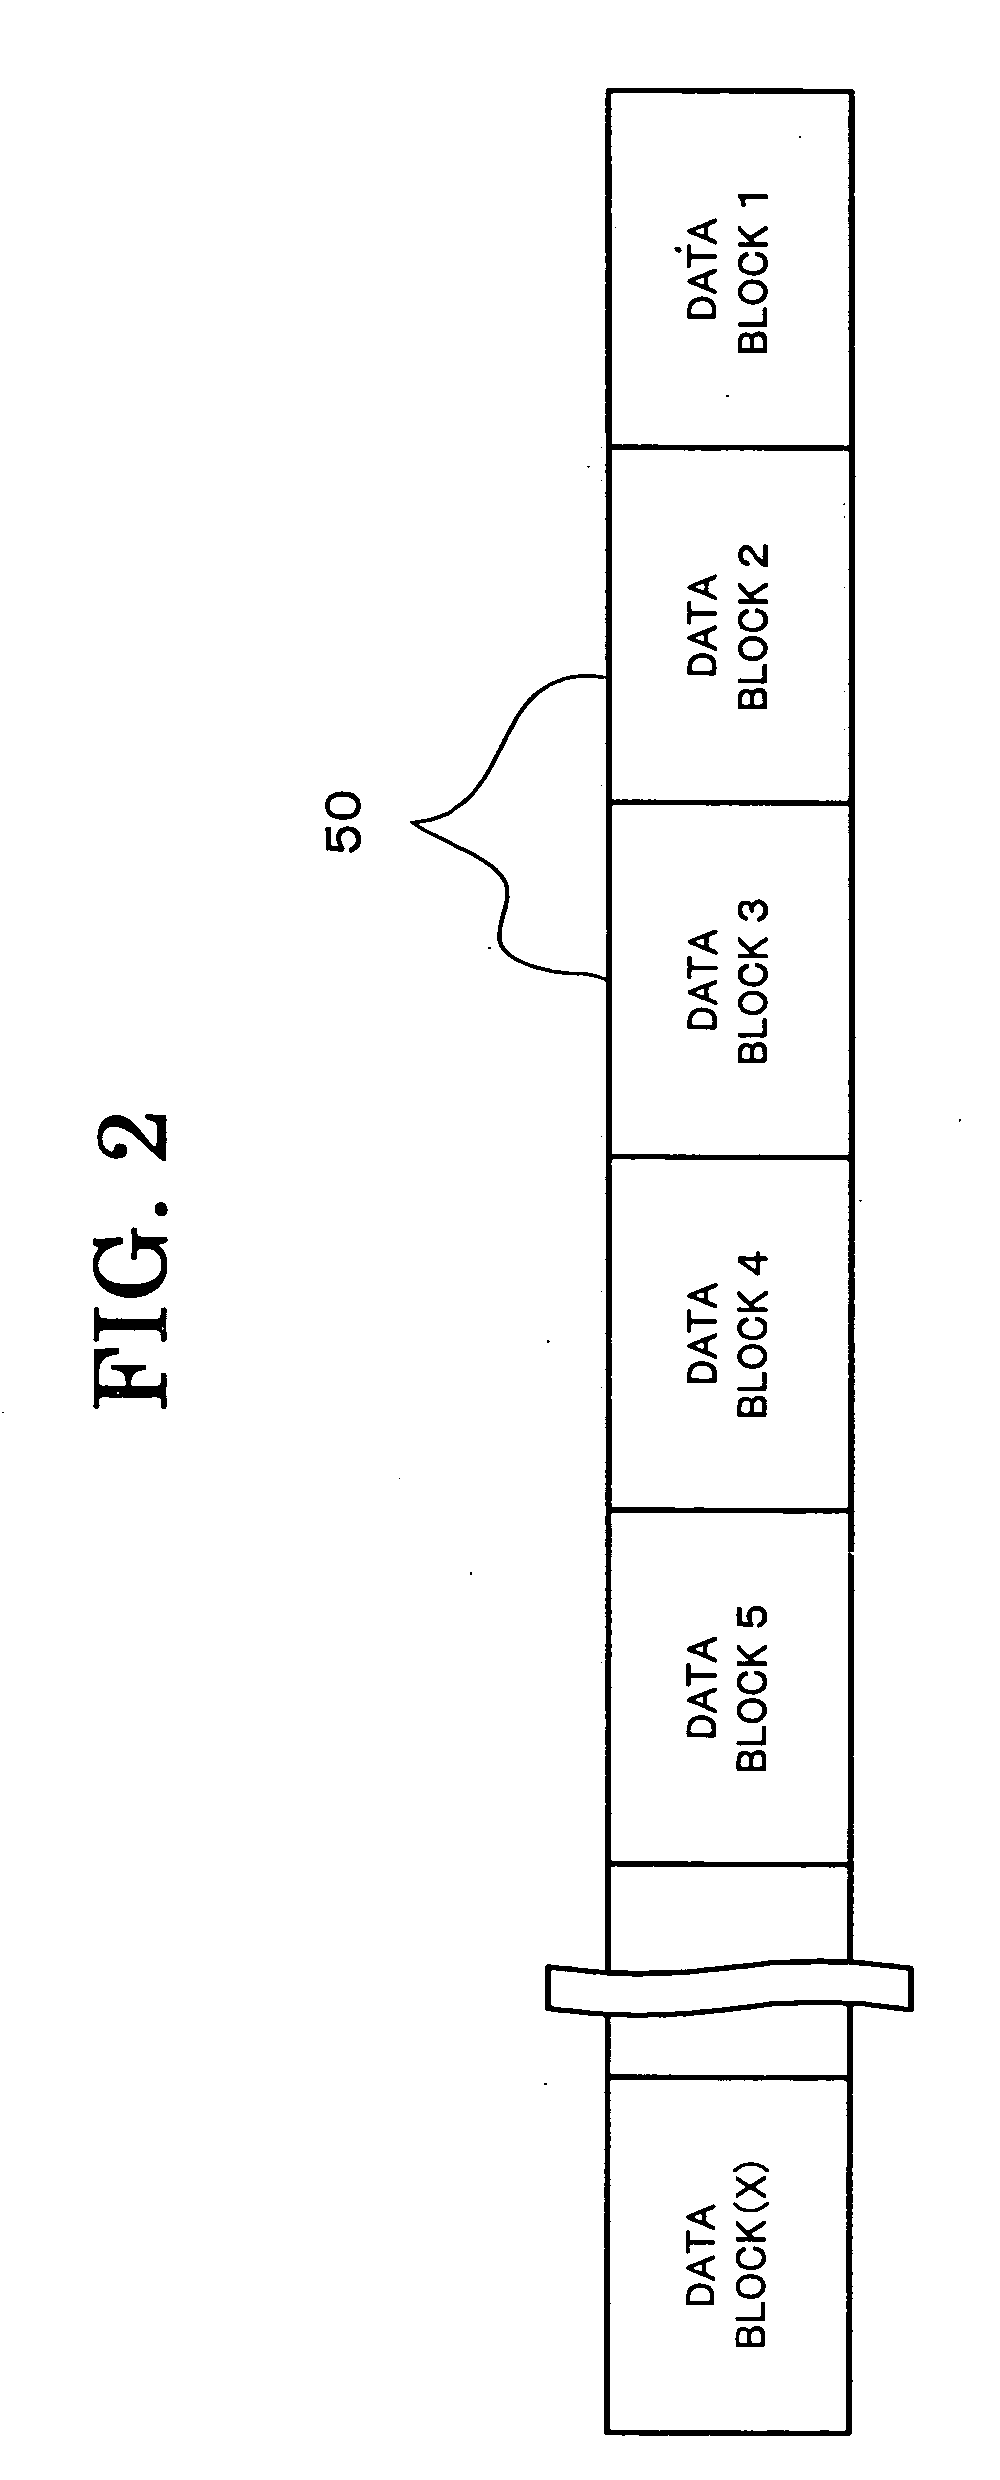 Motion picture data transmission method and system